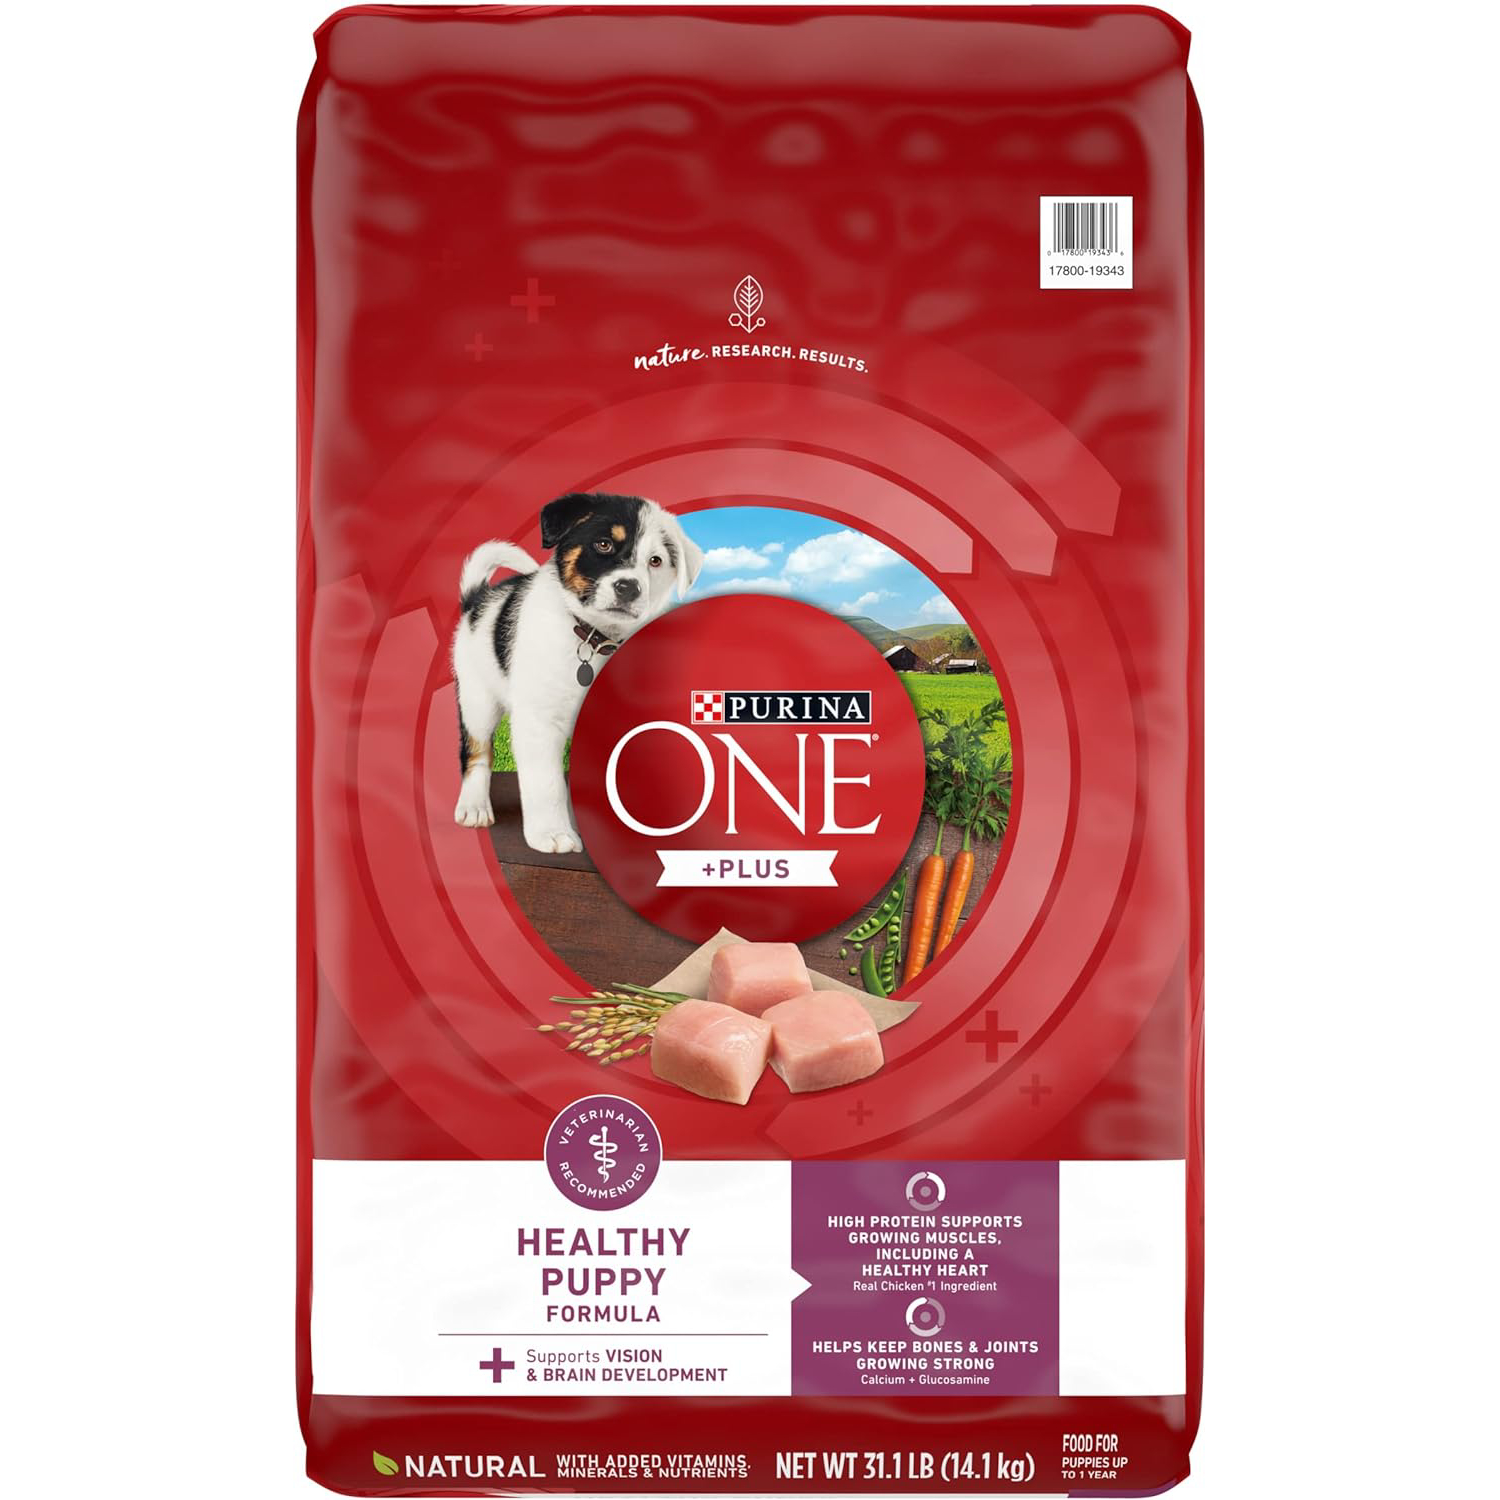 Purina ONE Plus Healthy Puppy Formula High Protein Natural Dry Puppy Food